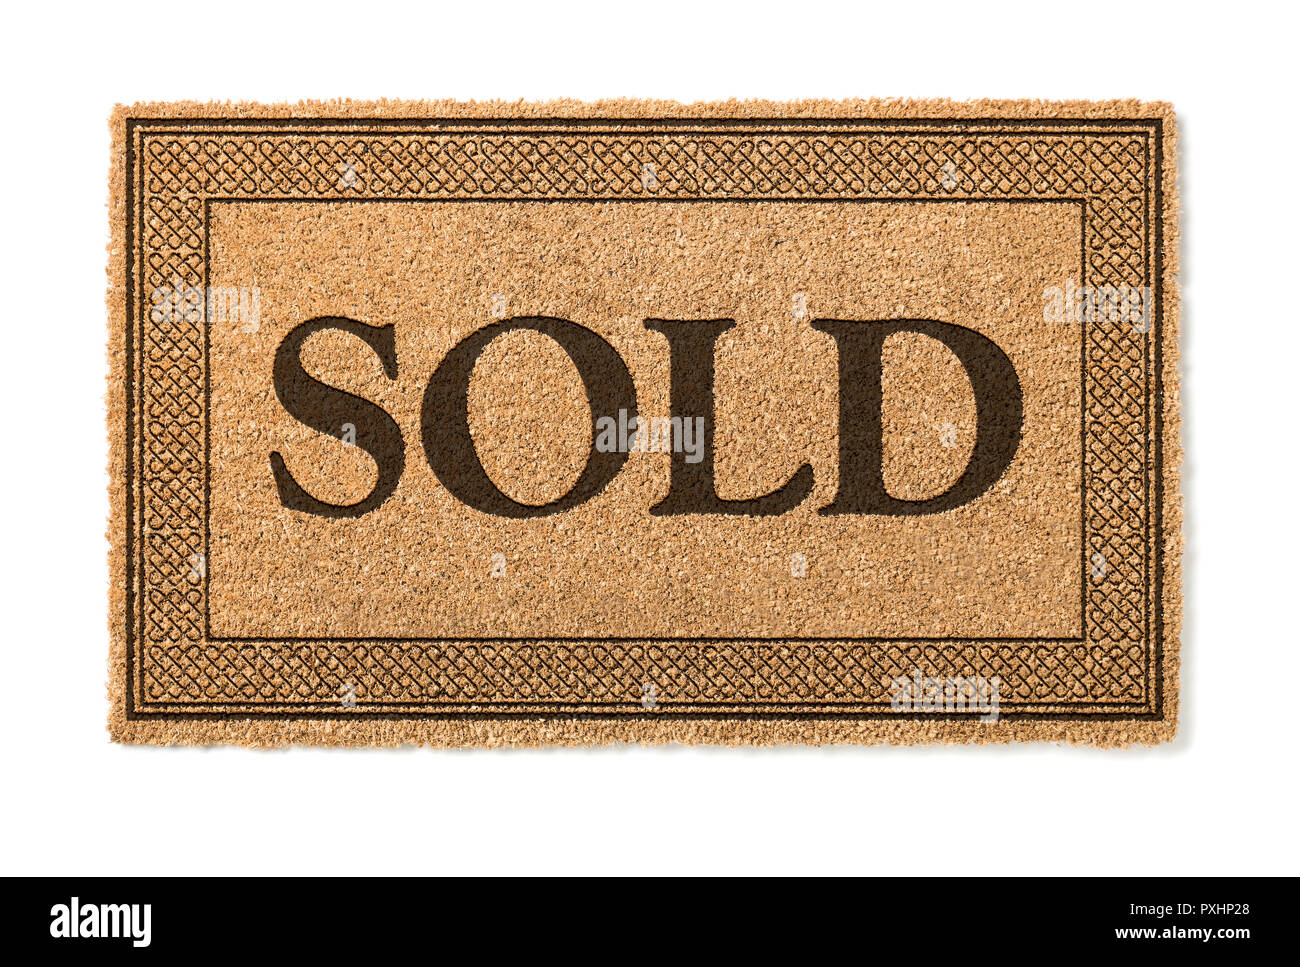 Sold Welcome Mat Isolated On A White Background. Stock Photo